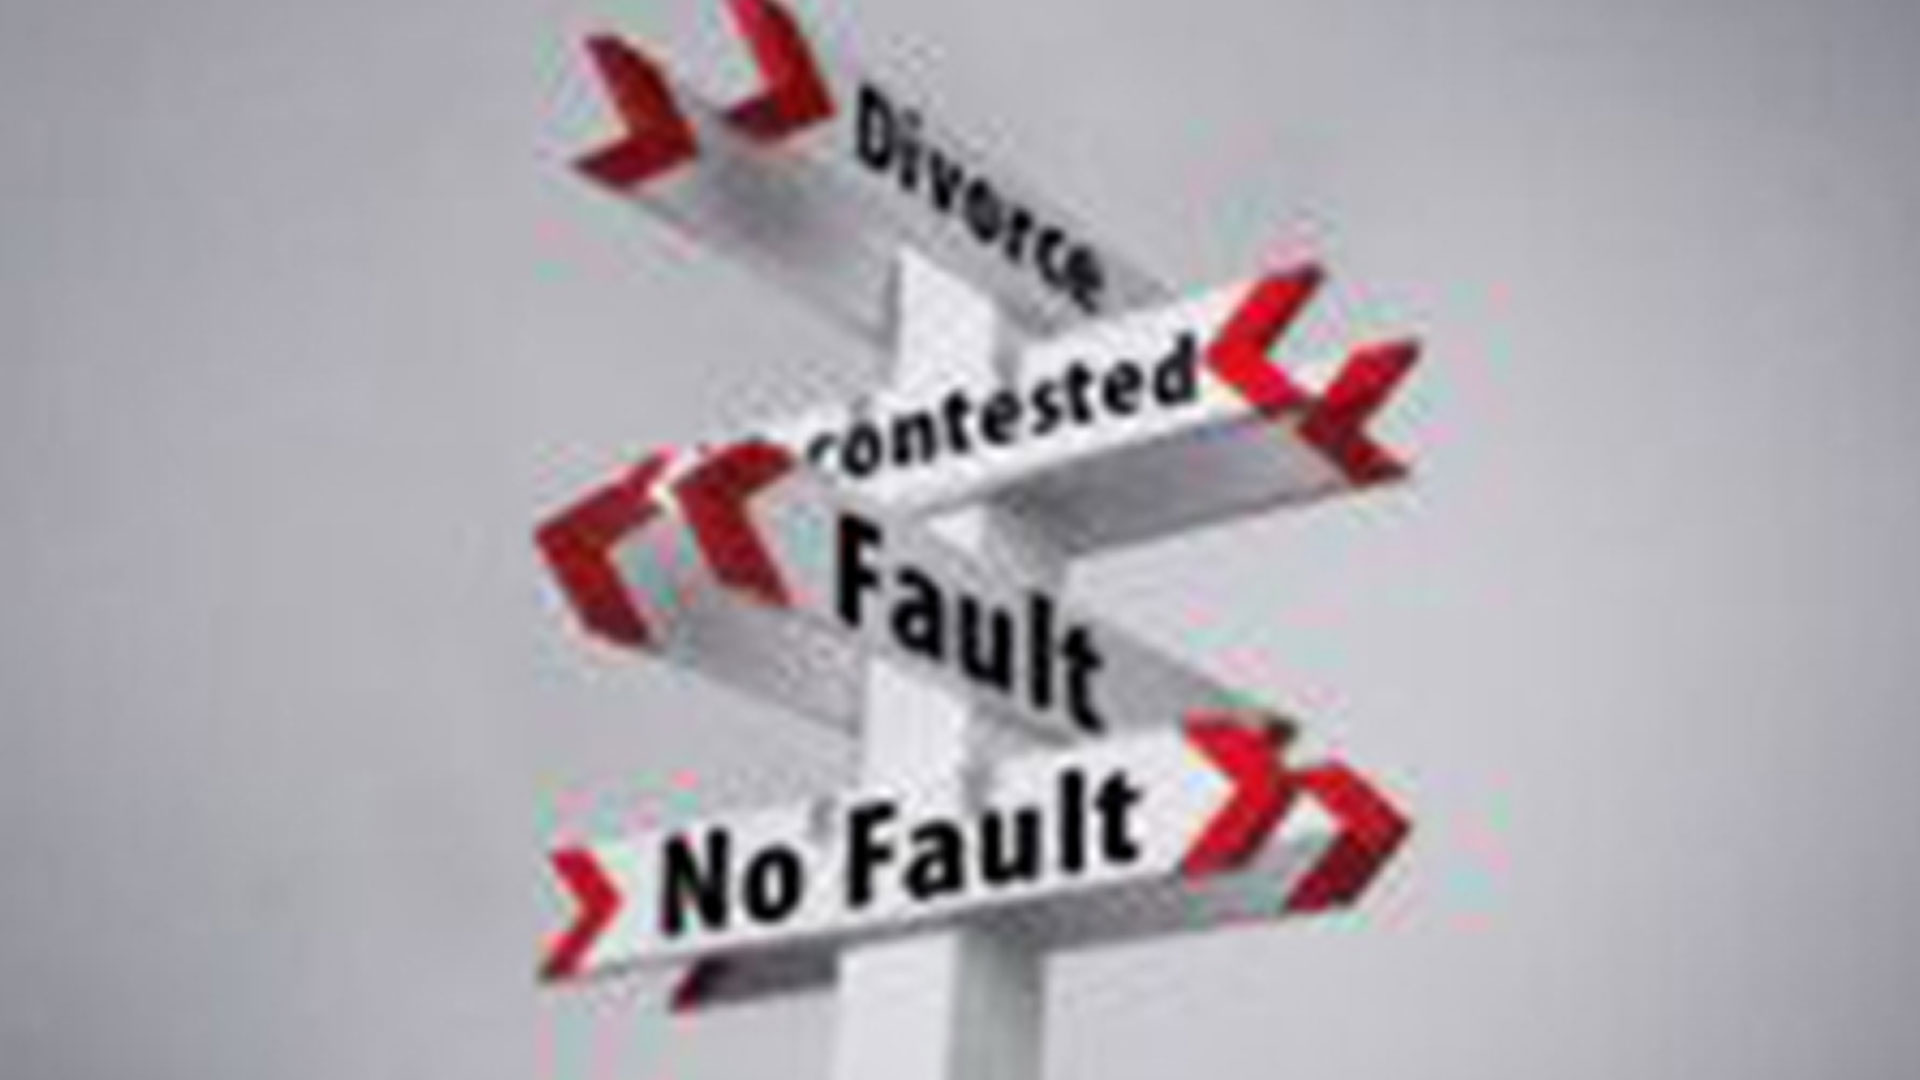 Repeating the call for “no fault” divorce to end blame game